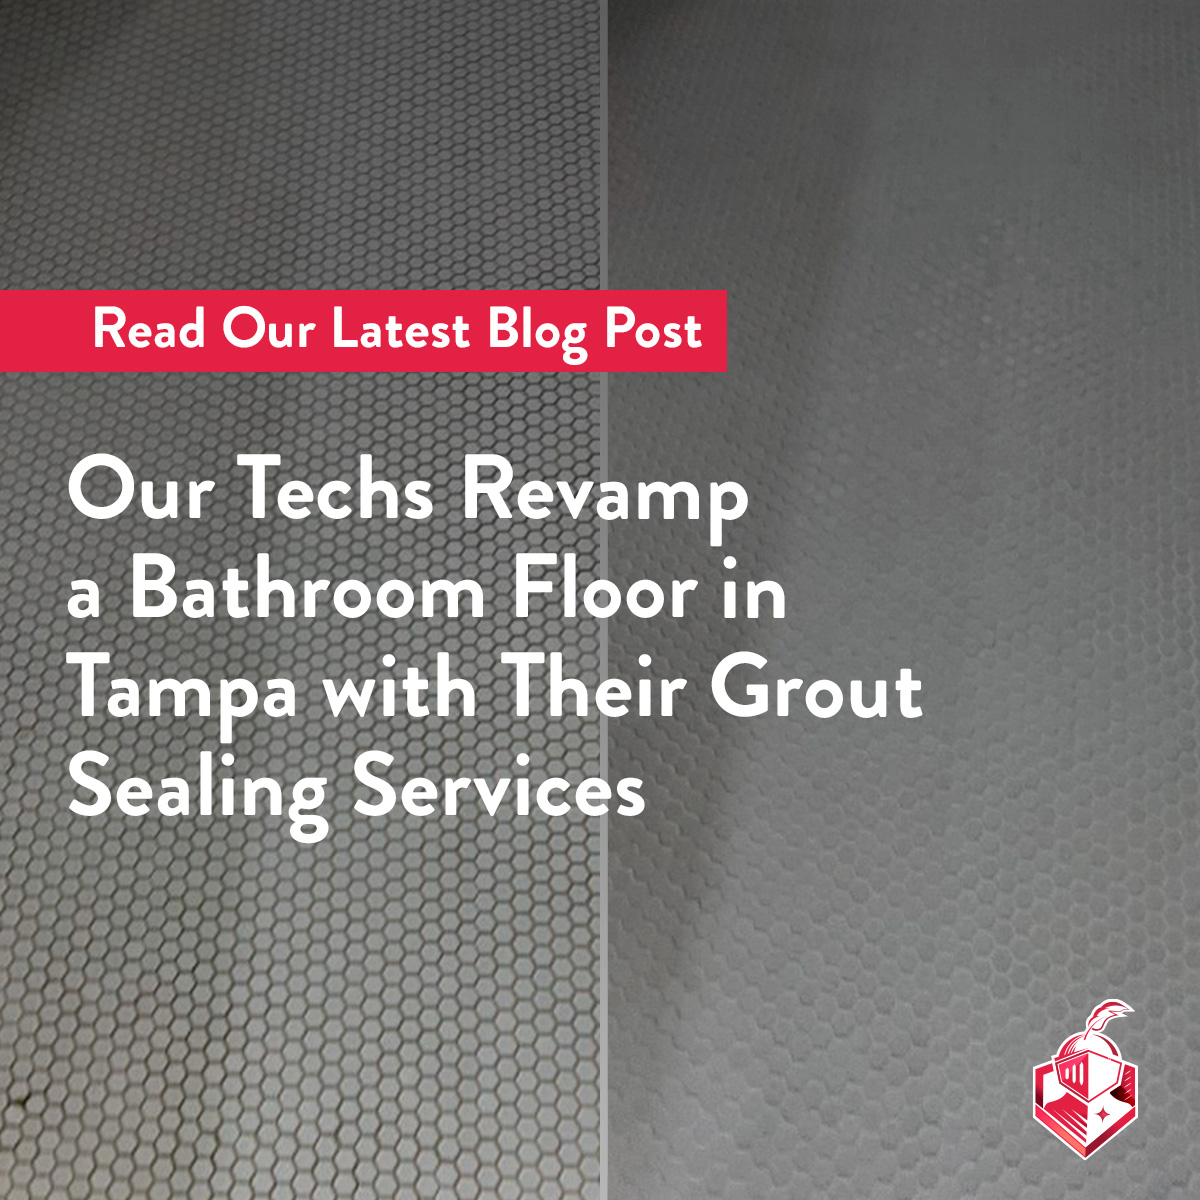 Our Techs Revamp a Bathroom Floor in Tampa with Their Grout Sealing Services